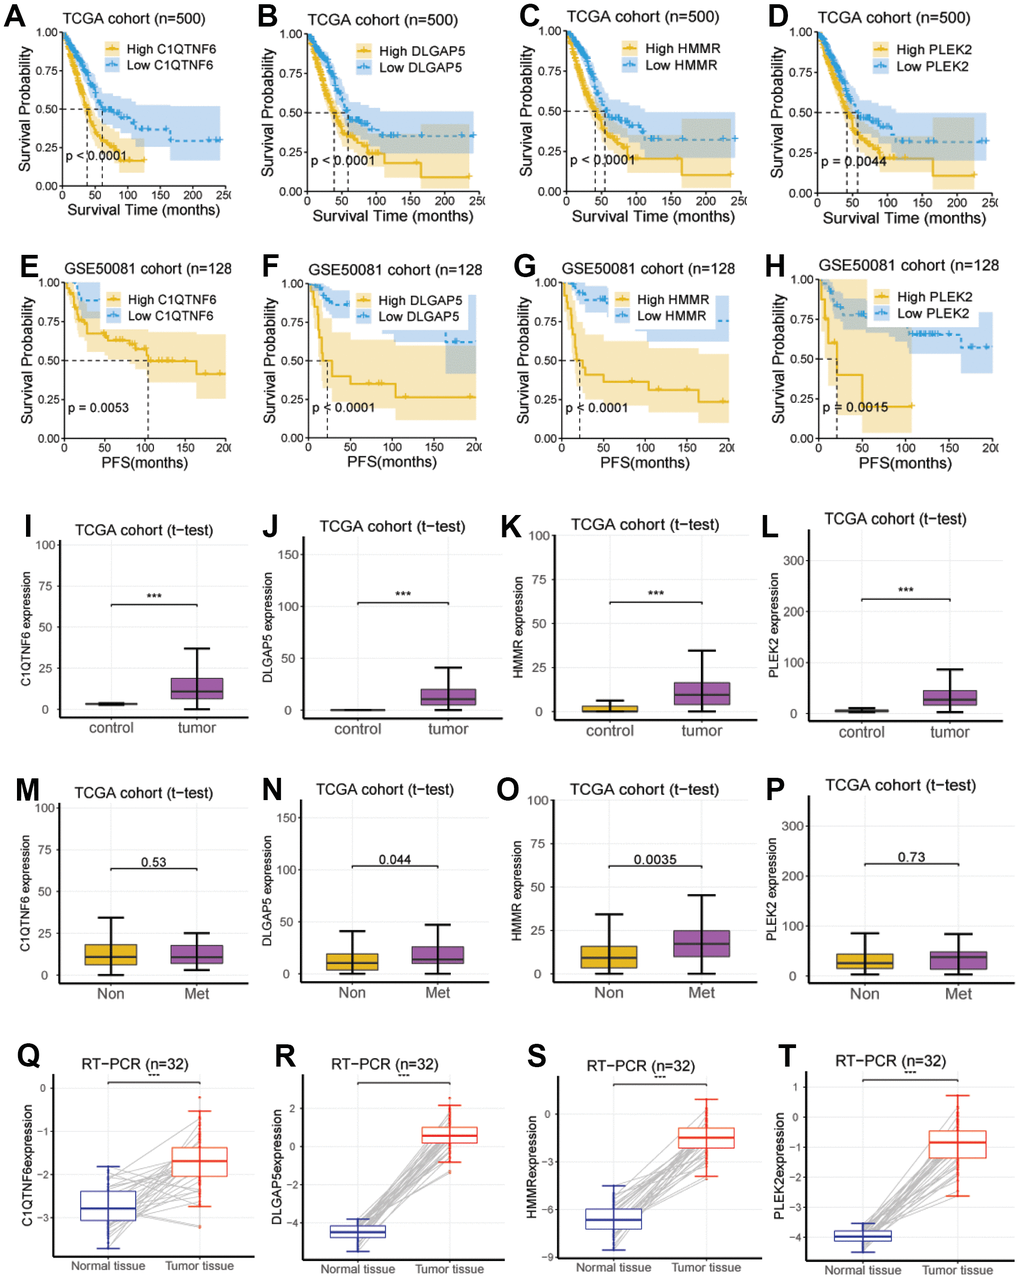 Investigation and validation of the hub genes associated with EMT. (A–D) Four genes, including C1QTNF6, DLGAP5, HMMR, and PLEK2, had a significant survival relevance for OS in the TCGA cohort (log-rank test; P E–H) Four genes, including C1QTNF6, DLGAP5, HMMR, and PLEK2, had a significant survival relevance for PFS in the GSE50081 cohort (log-rank test; P I–L) Consistent with the above findings, the expression of the four genes was enhanced in tumor tissues compared with normal tissues using RNA-seq from the TCGA cohort (P M–P) DLGAP5 and HMMR were significantly upregulated in the lung metastatic foci as compared with non-metastatic lung foci, while C1QTNF6 and PLEK2 were not. (Q–T) C1QTNF6, DLGAP5, HMMR, and PLEK2 were also significantly upregulated in the cancerous tissues as compared with matched normal tissues using RT-PCR for 32 pairs of LUAD tissues and matched normal tissues from our hospital (P 